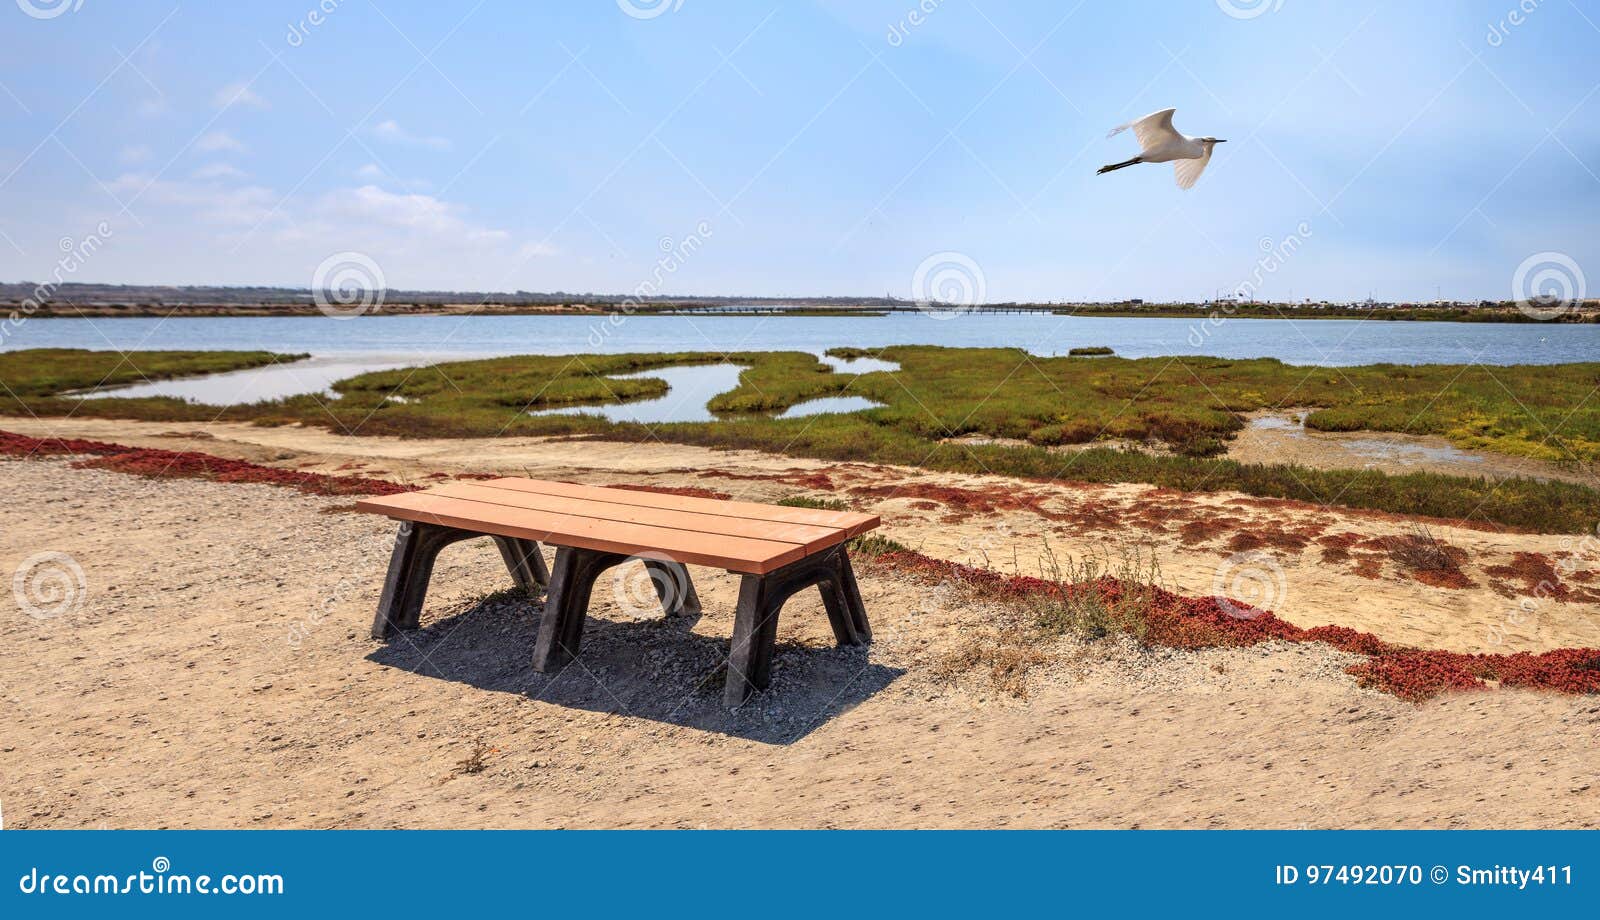 bench overlooking the peaceful and tranquil marsh of bolsa chica wetlands